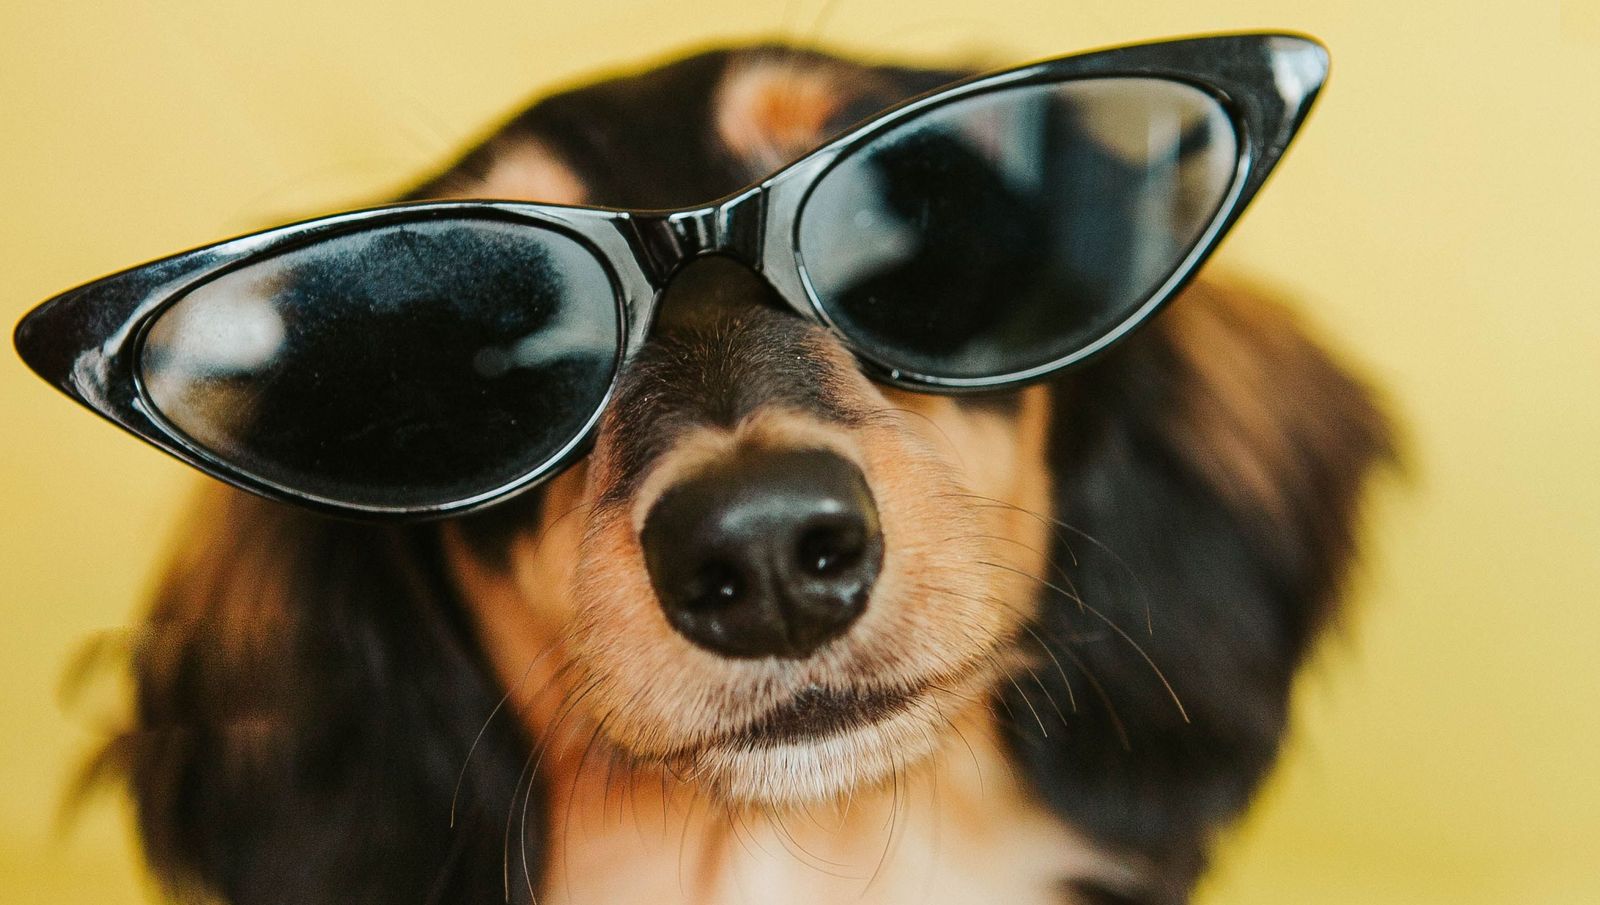 Should your dog be wearing sunglasses? - Vetster